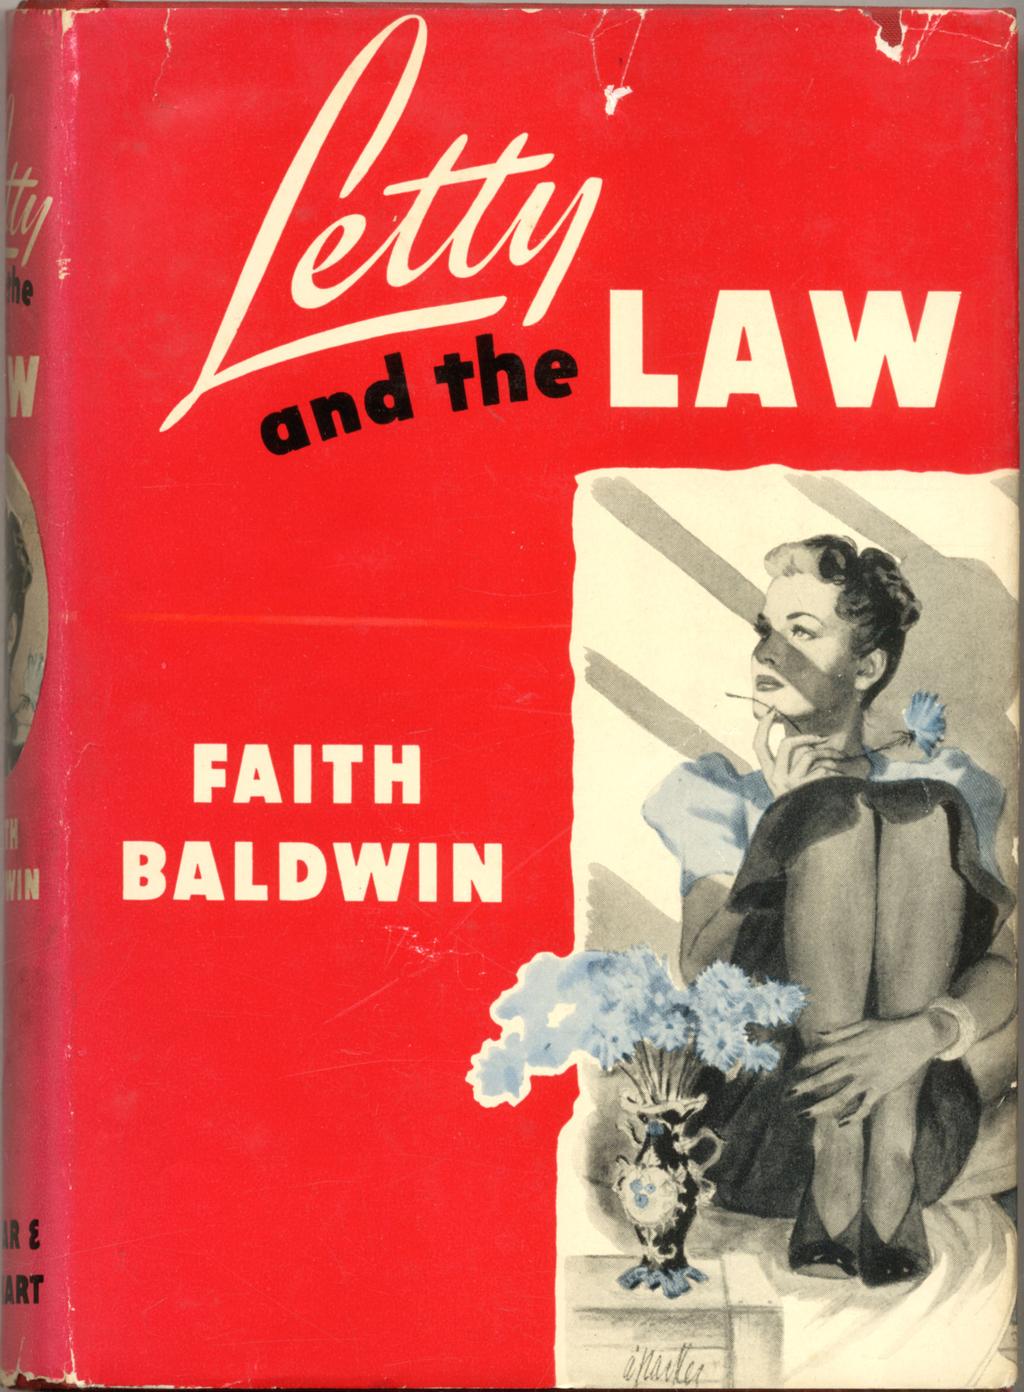 Letty and the Law New York: Farrar and Rinehart (1940) $250 First edition. About fine in modestly rubbed very good dustwrapper with some tiny nicks.